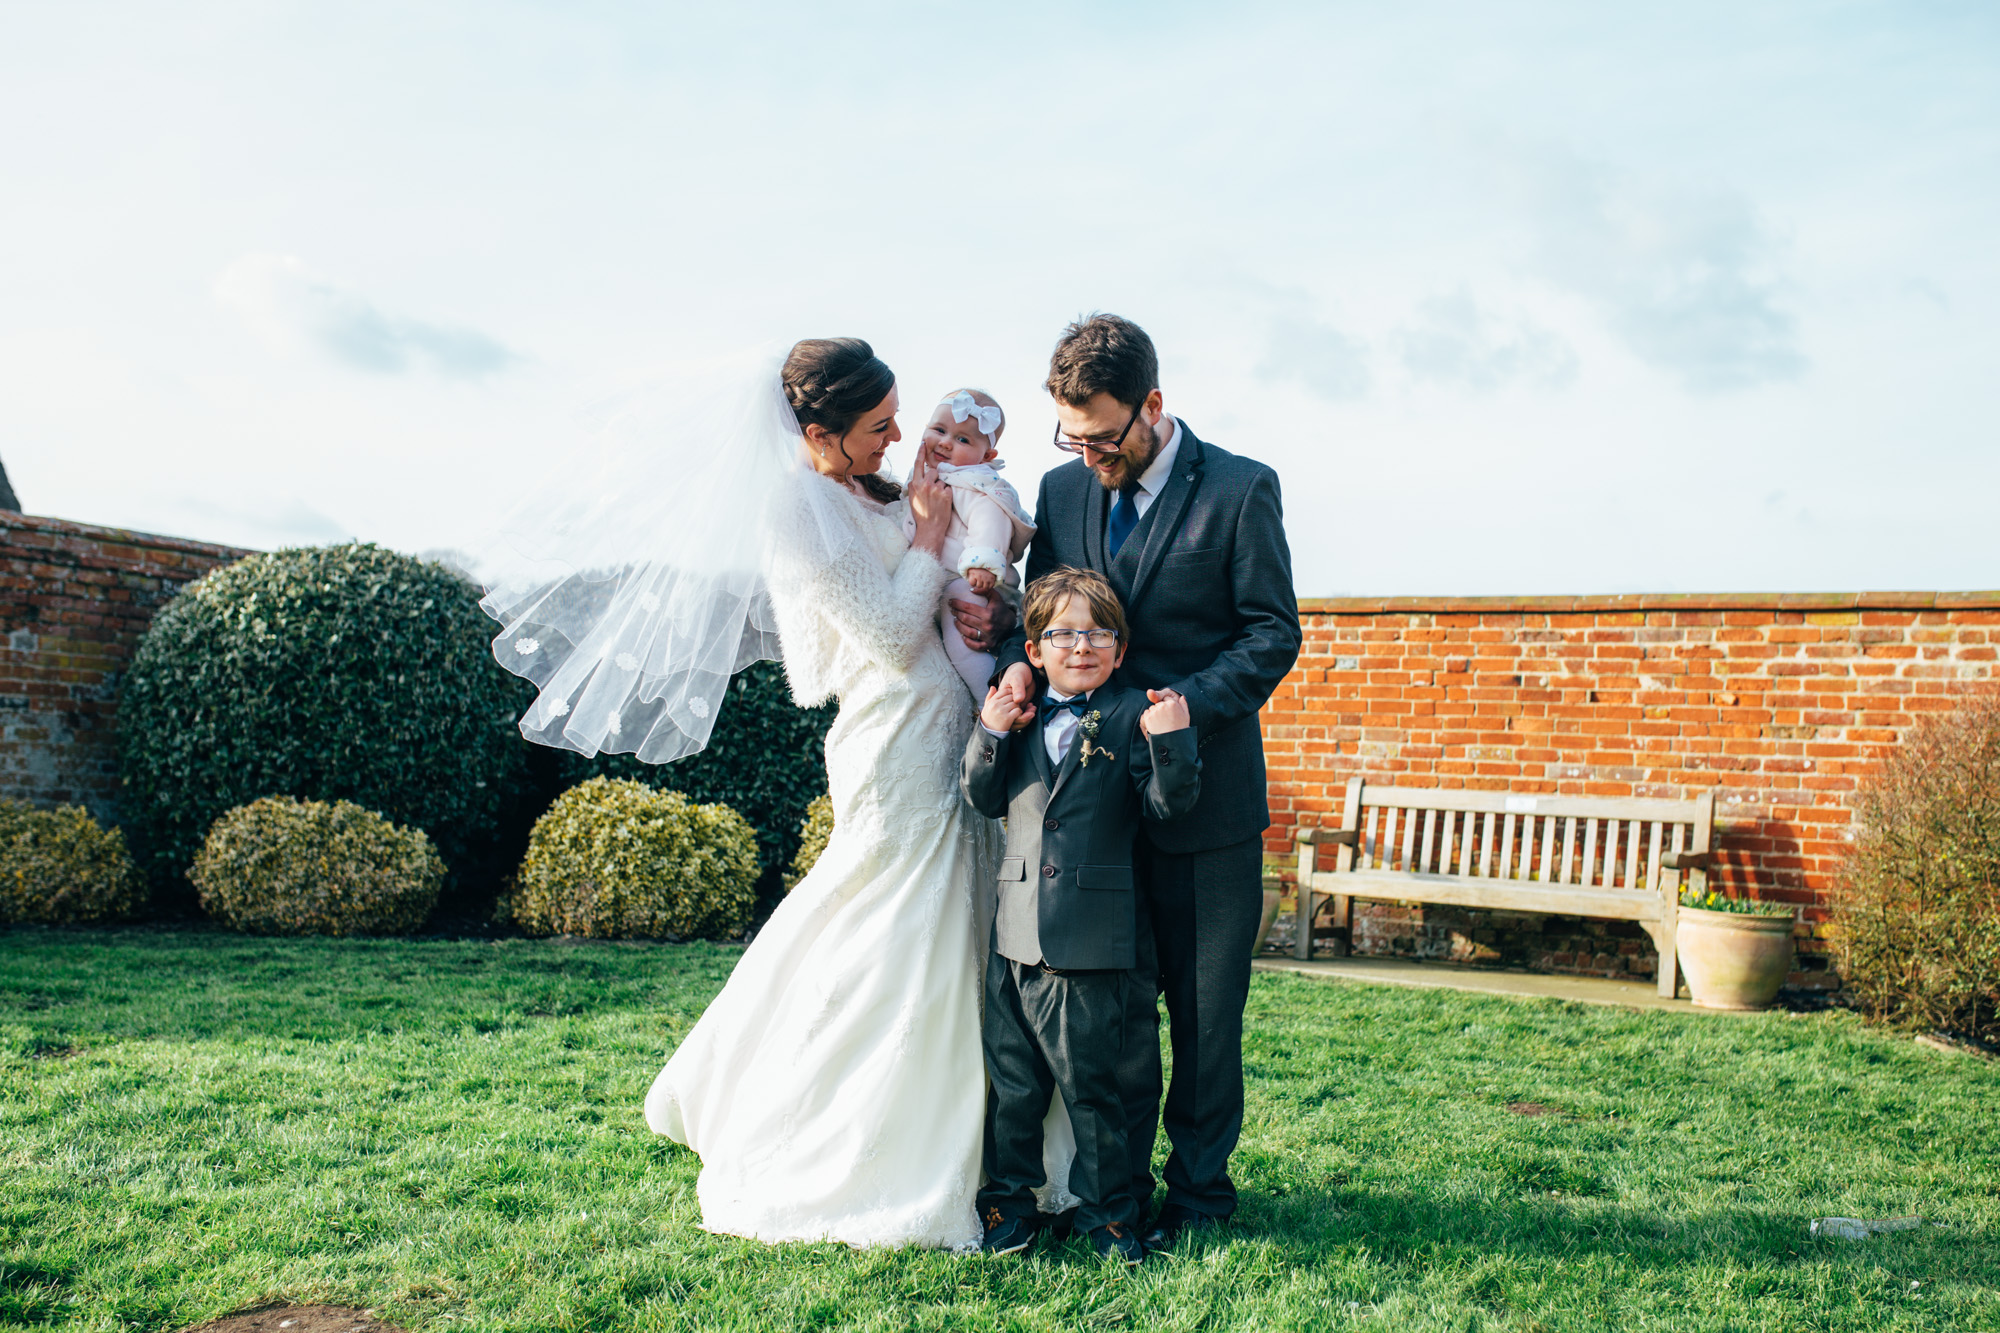 Wedding Photography of new family at Wood Farm Barn in Suffolk